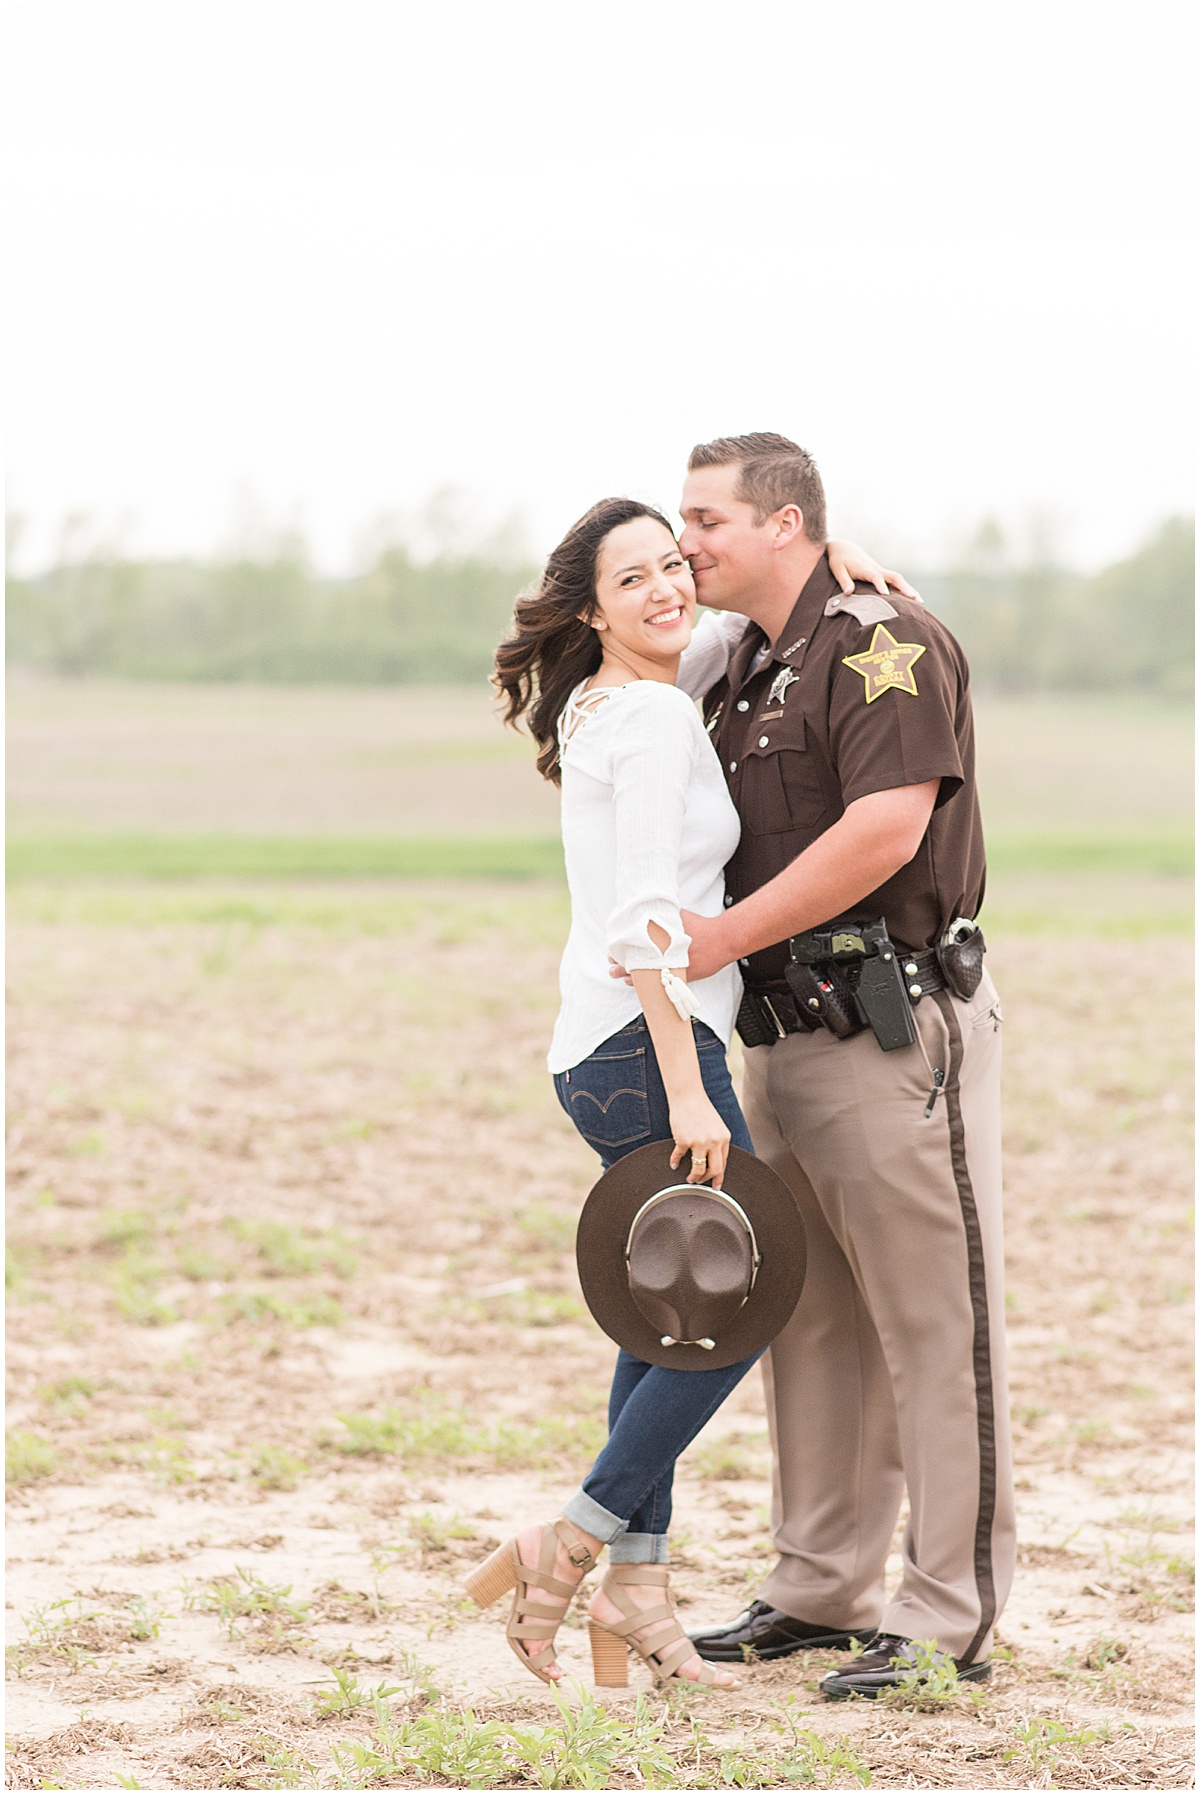 Jesse Wallace and Miryam Herrera's spring engagement photos at Wea Creek Orchard by Victoria Rayburn Photography